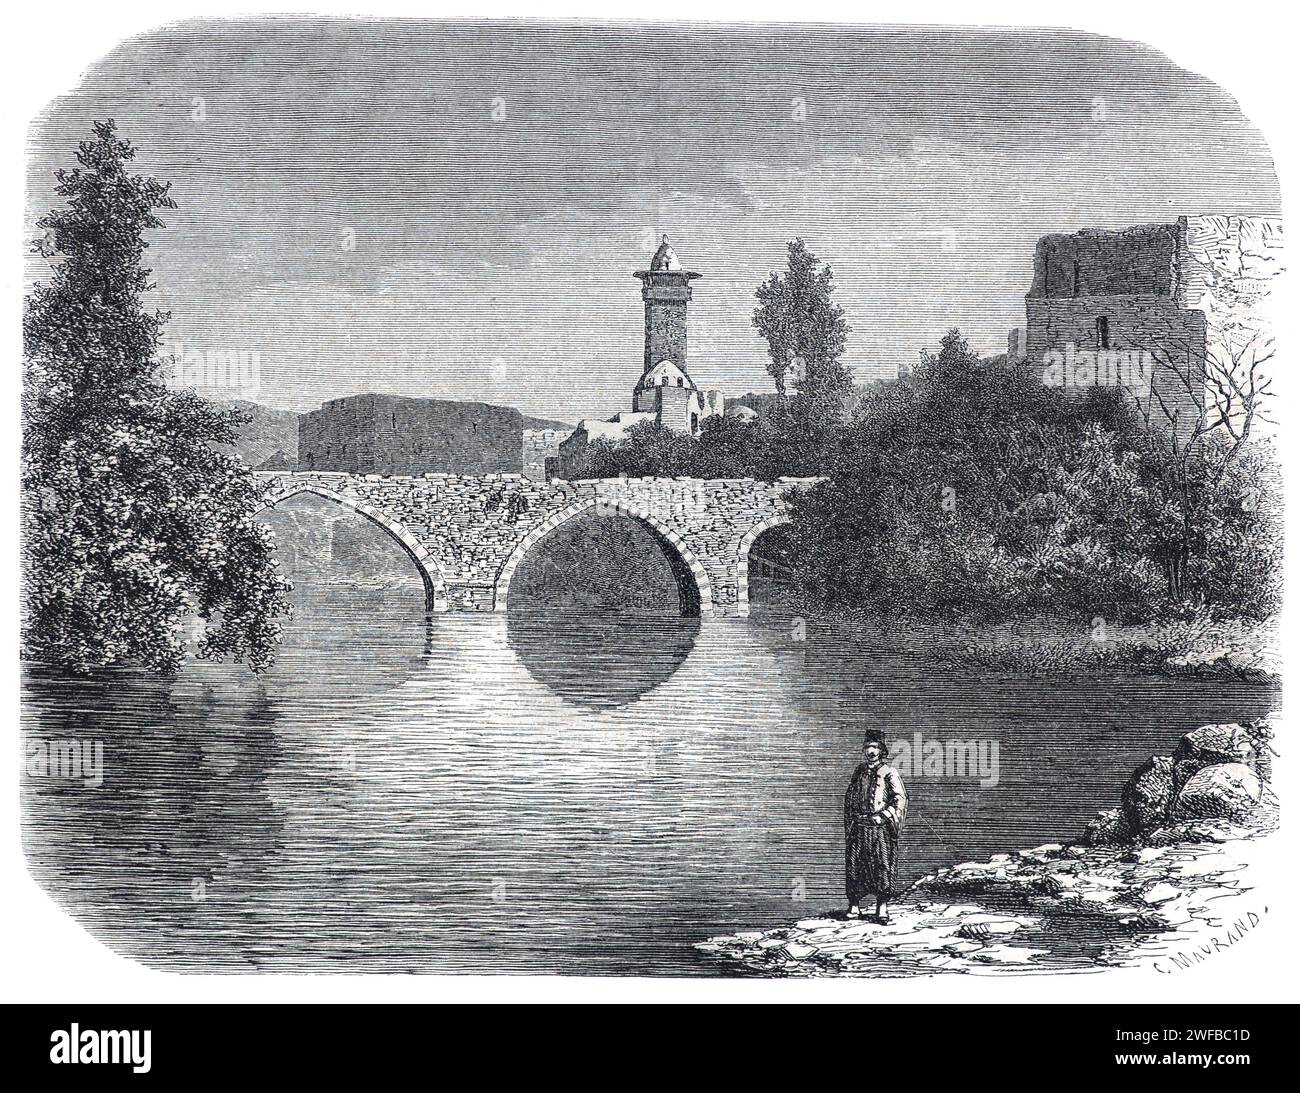 Historic Bridge over the Orontes River at Hama Syria. Vintage or Historic Engraving or Illustration 1863 Stock Photo